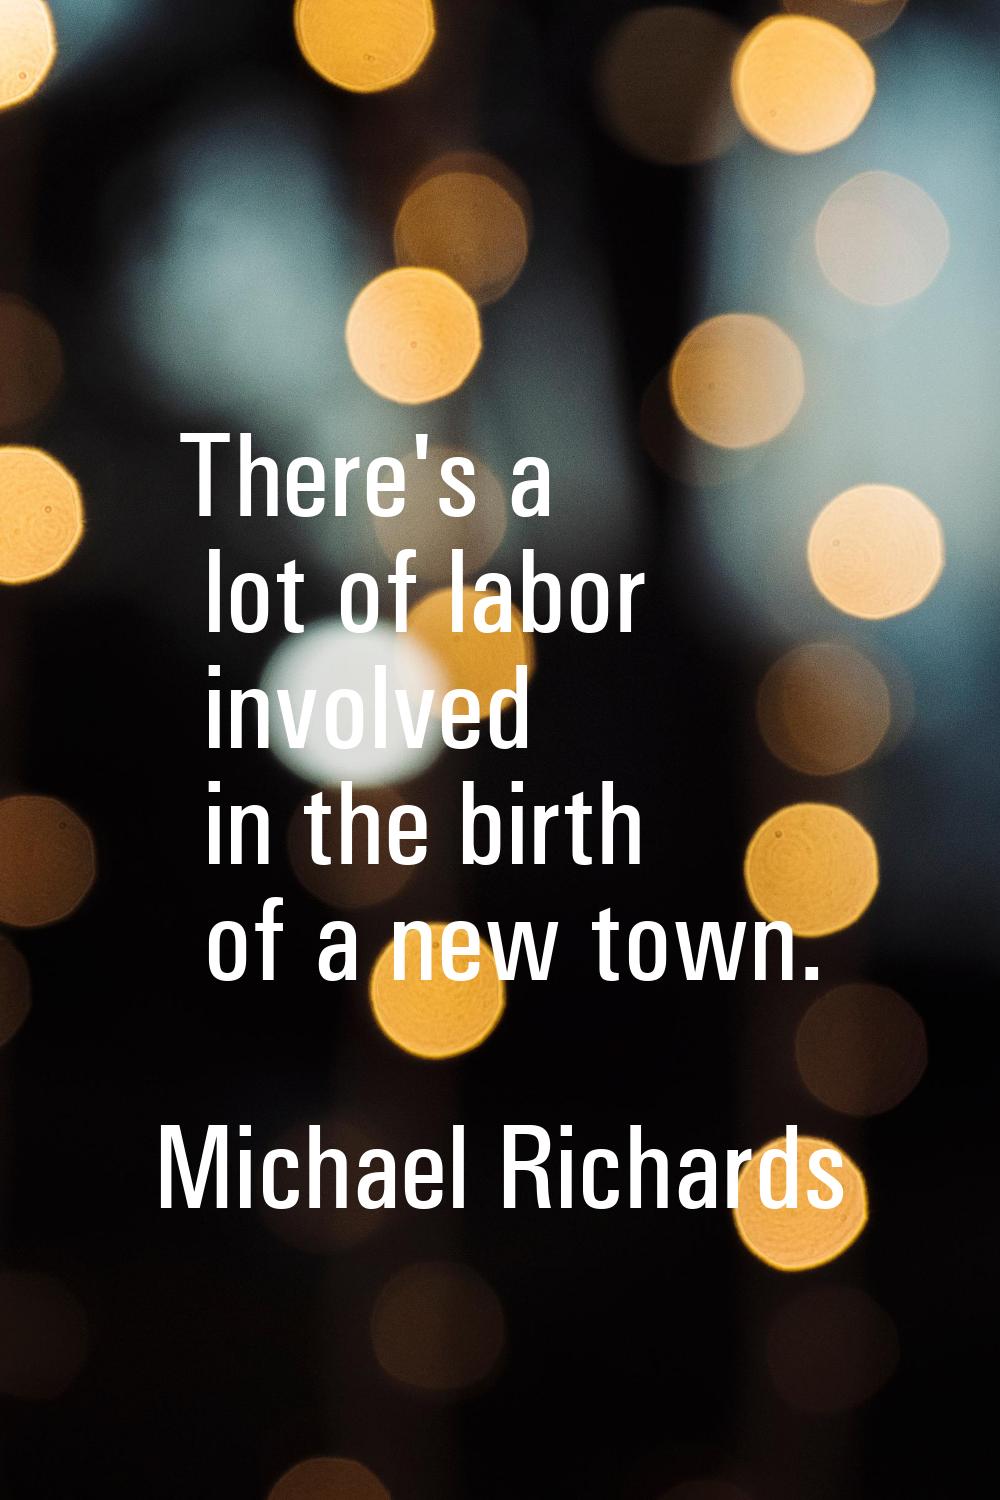 There's a lot of labor involved in the birth of a new town.